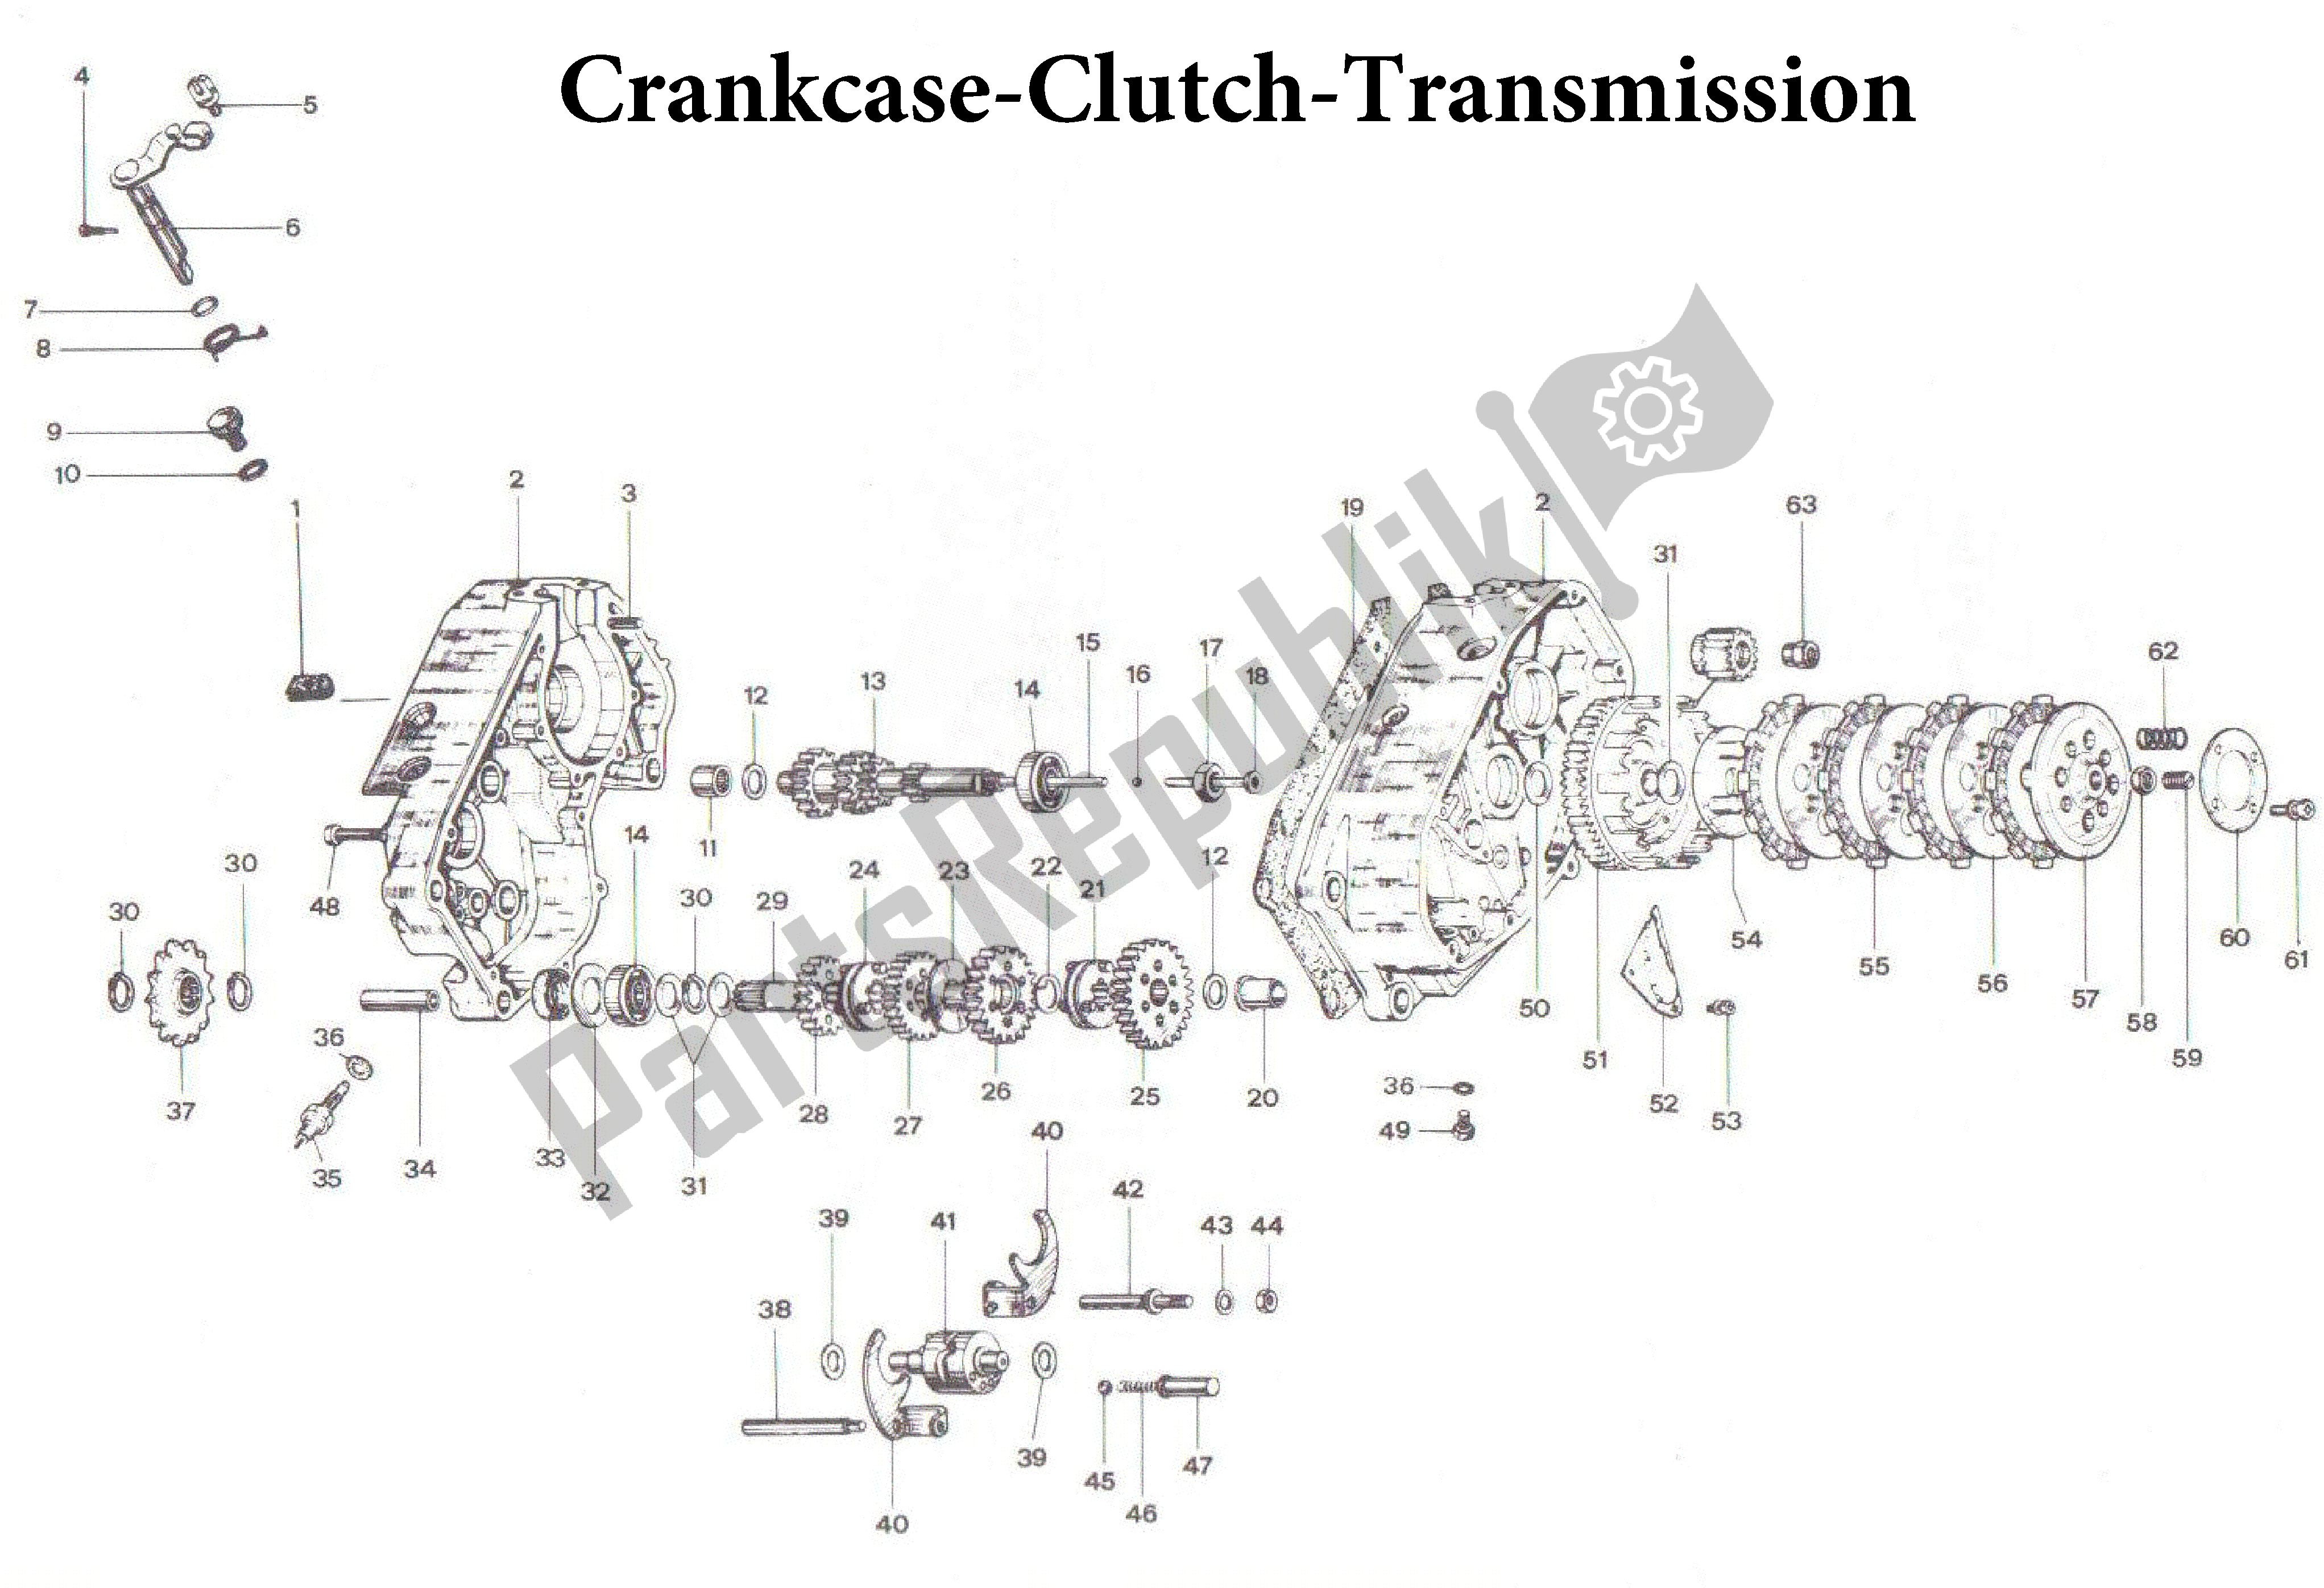 All parts for the Crankcase-clutch-transmission of the Aprilia AF1 50 1988